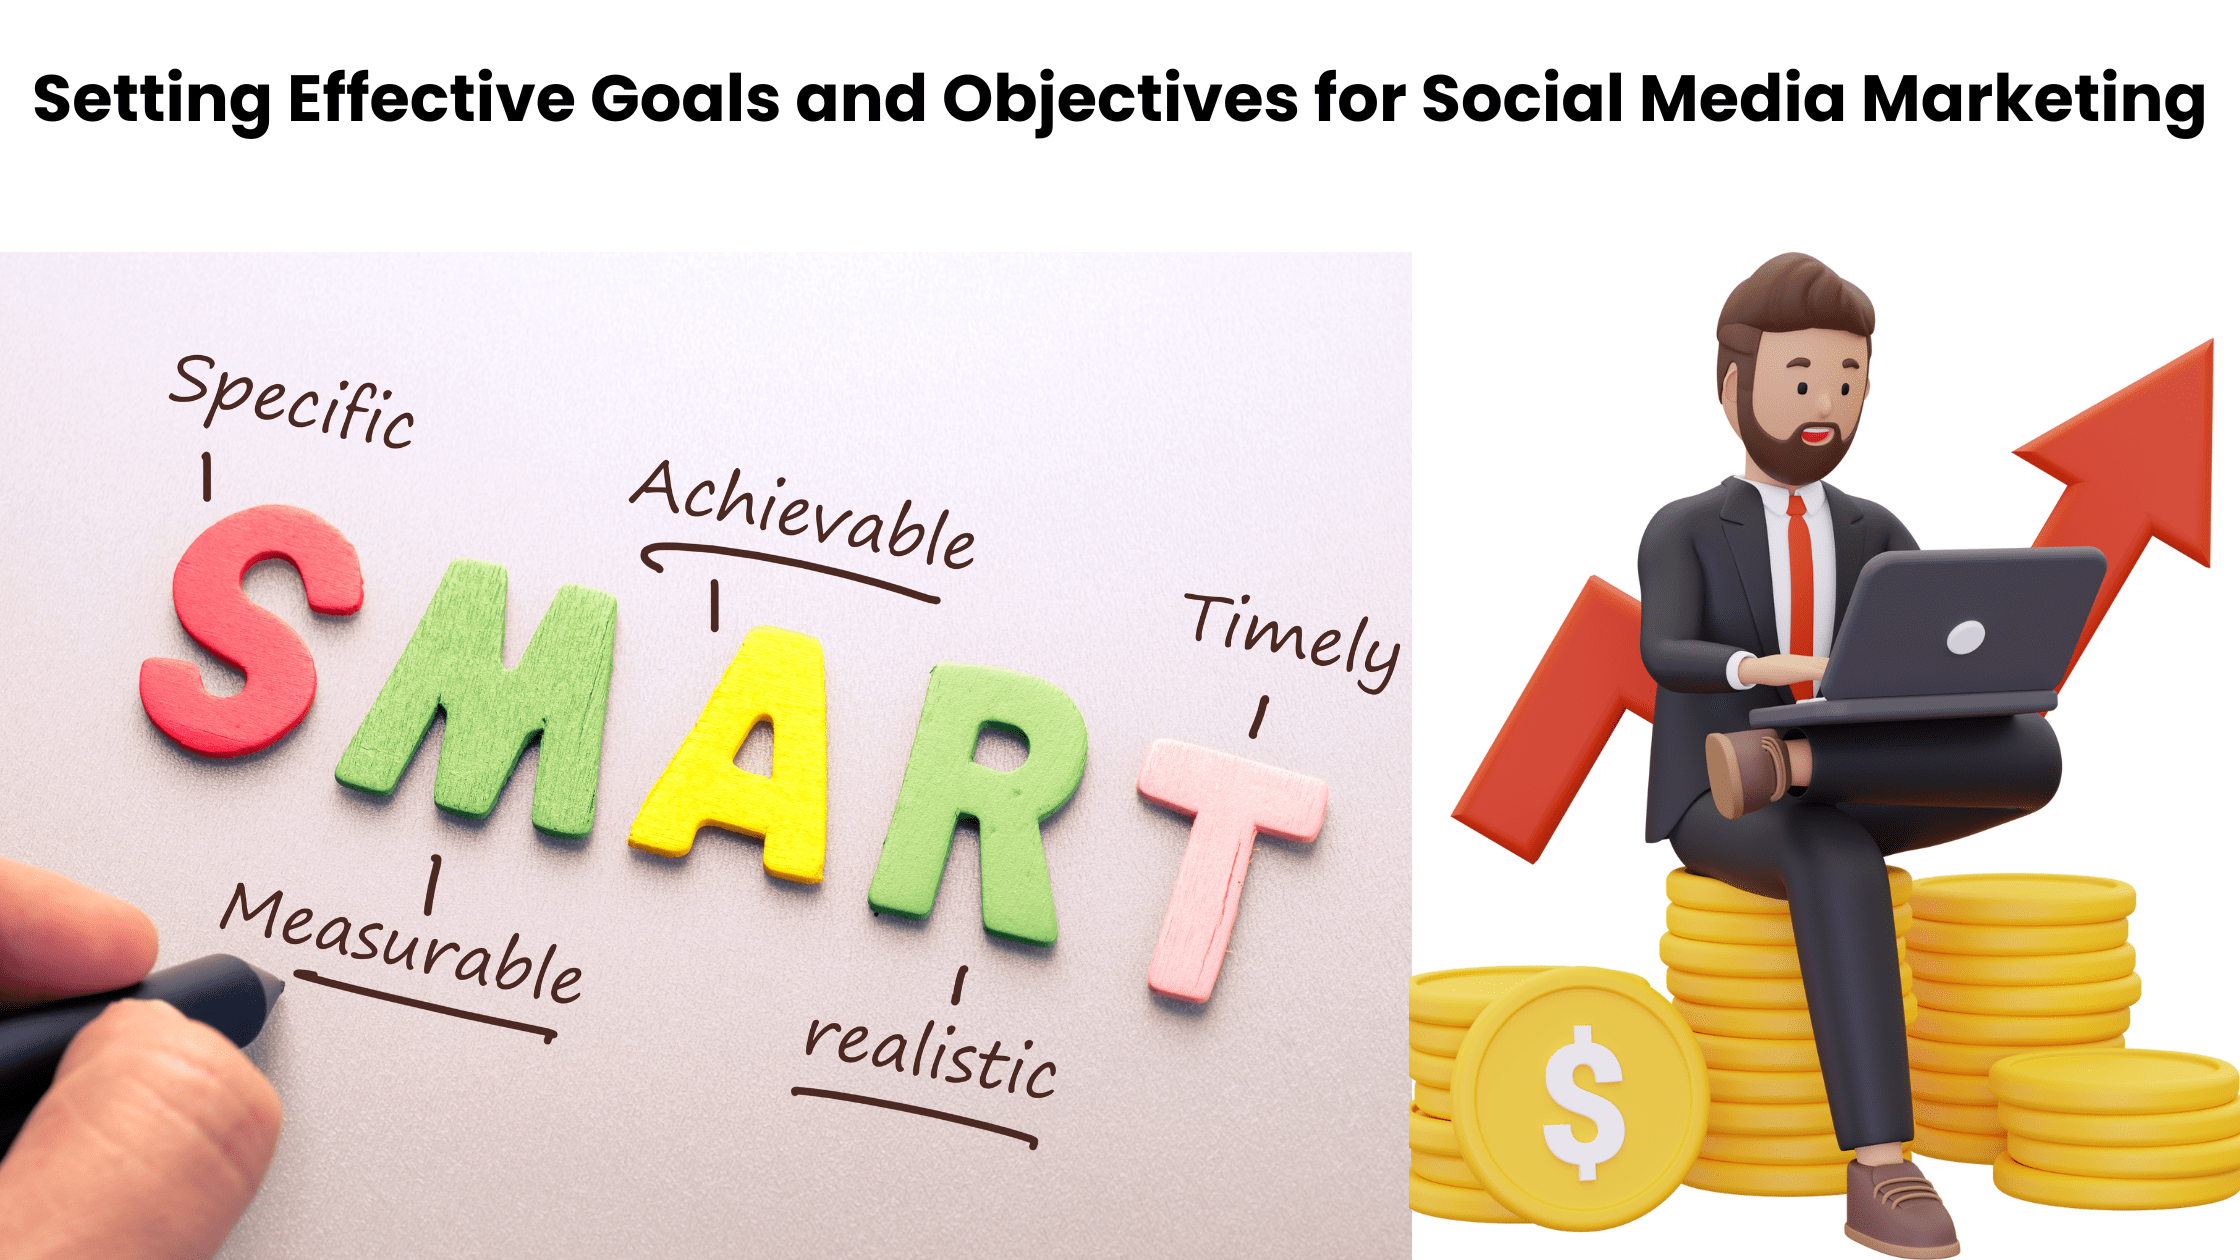 How to Set Effective Goals and Objectives for Social Media Marketing: The Essential 5 Step SMART Framework